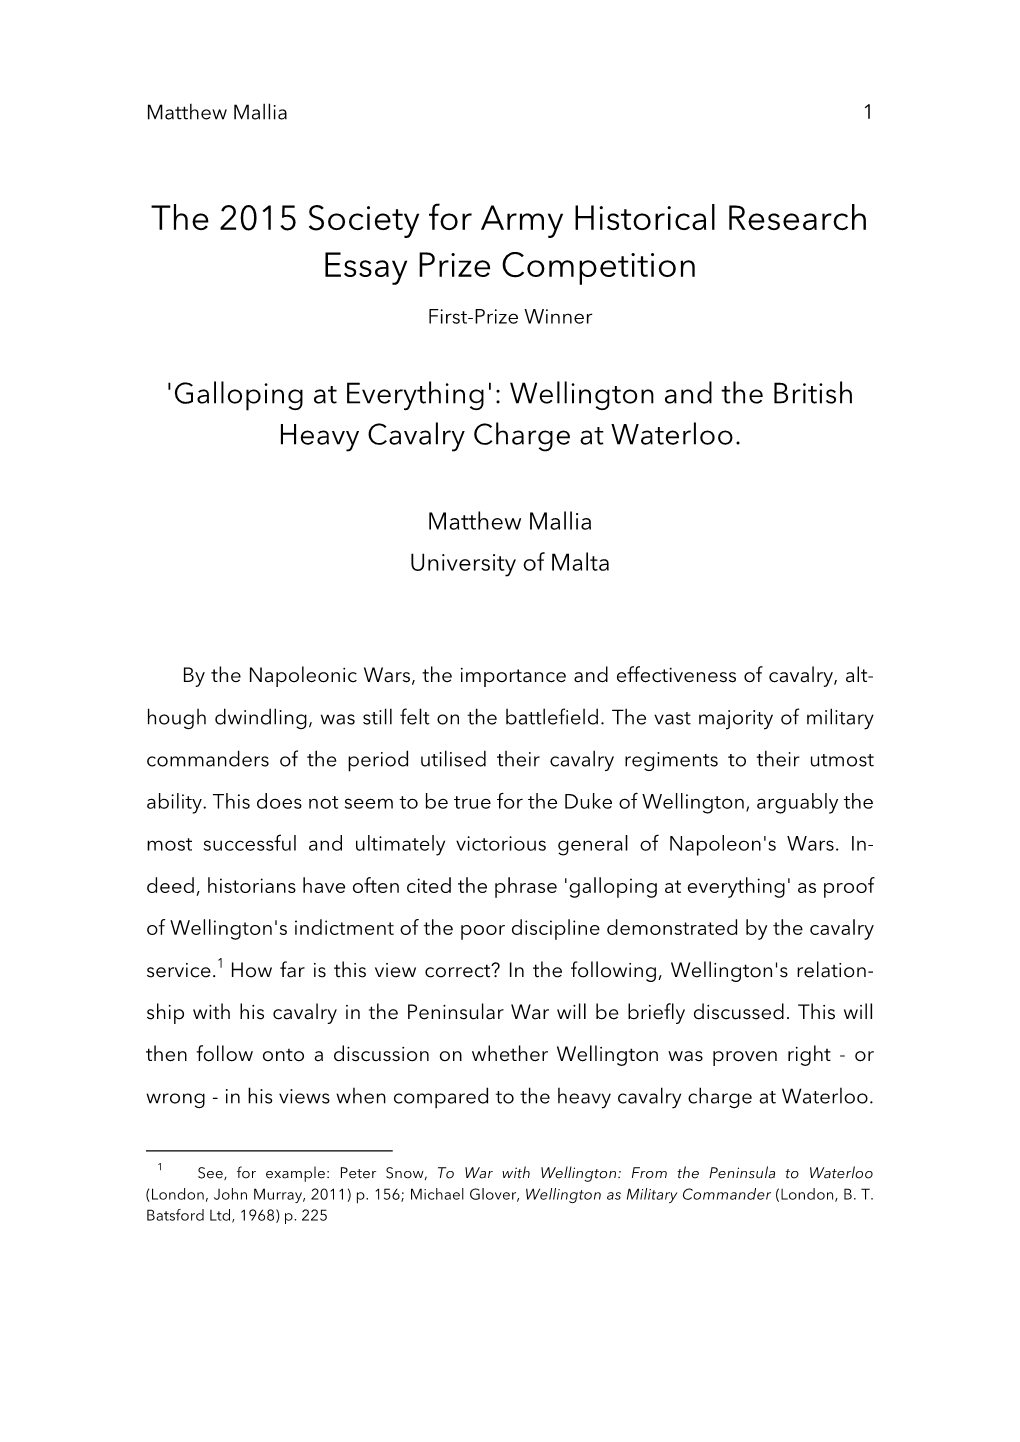 The 2015 Society for Army Historical Research Essay Prize Competition